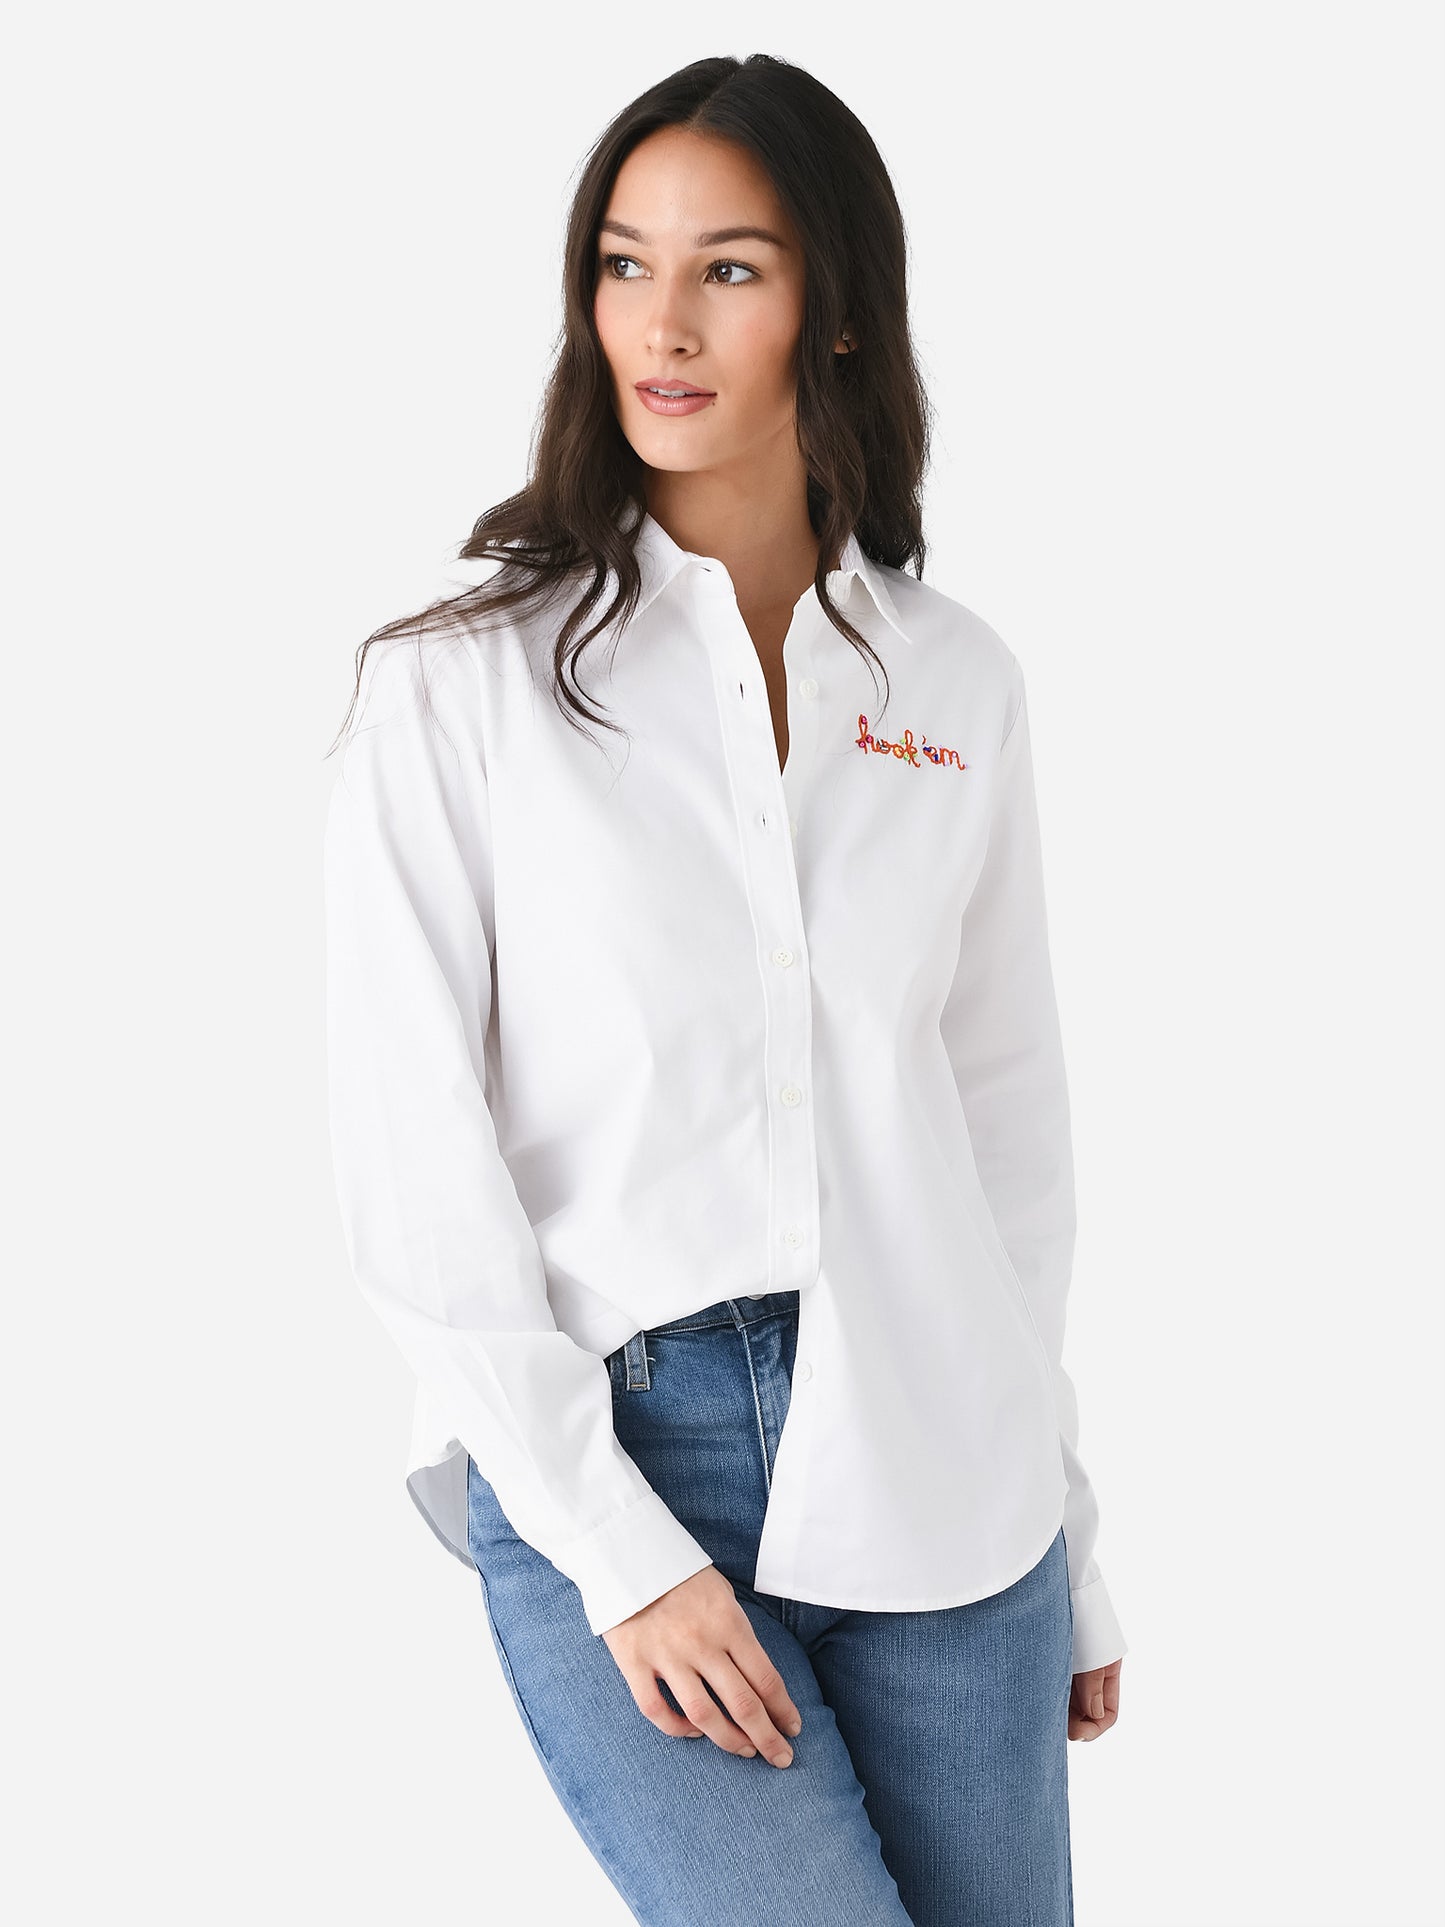 Lingua Franca Women's Embroidered Button-Down Shirt